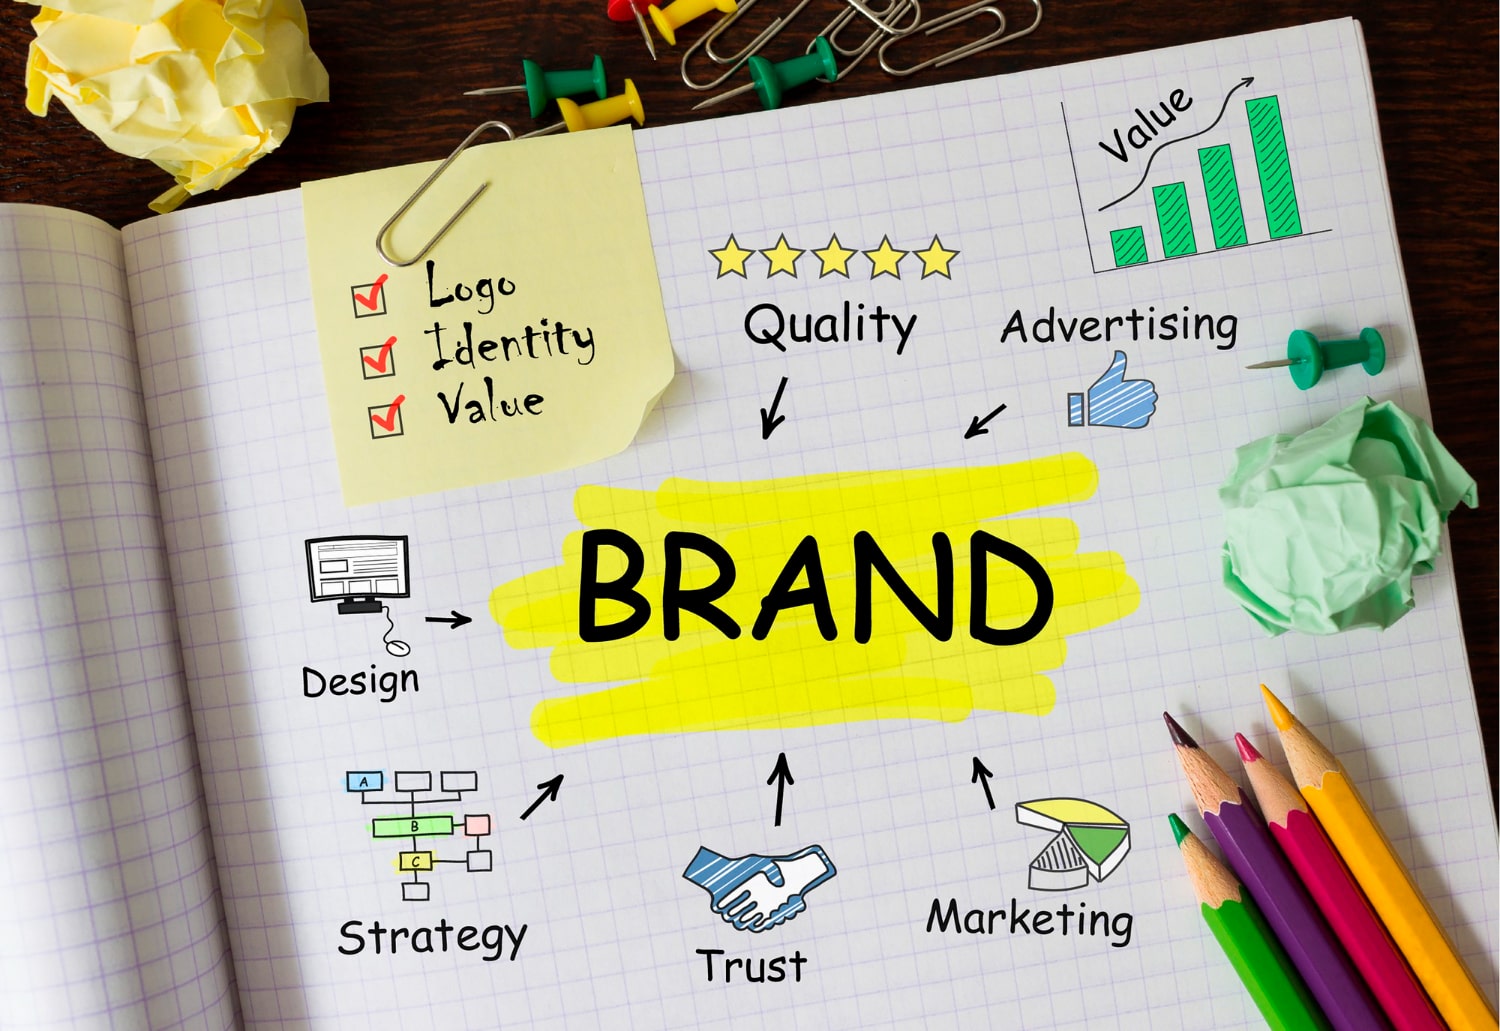 Contrasting Personal and Business Brand Strategies